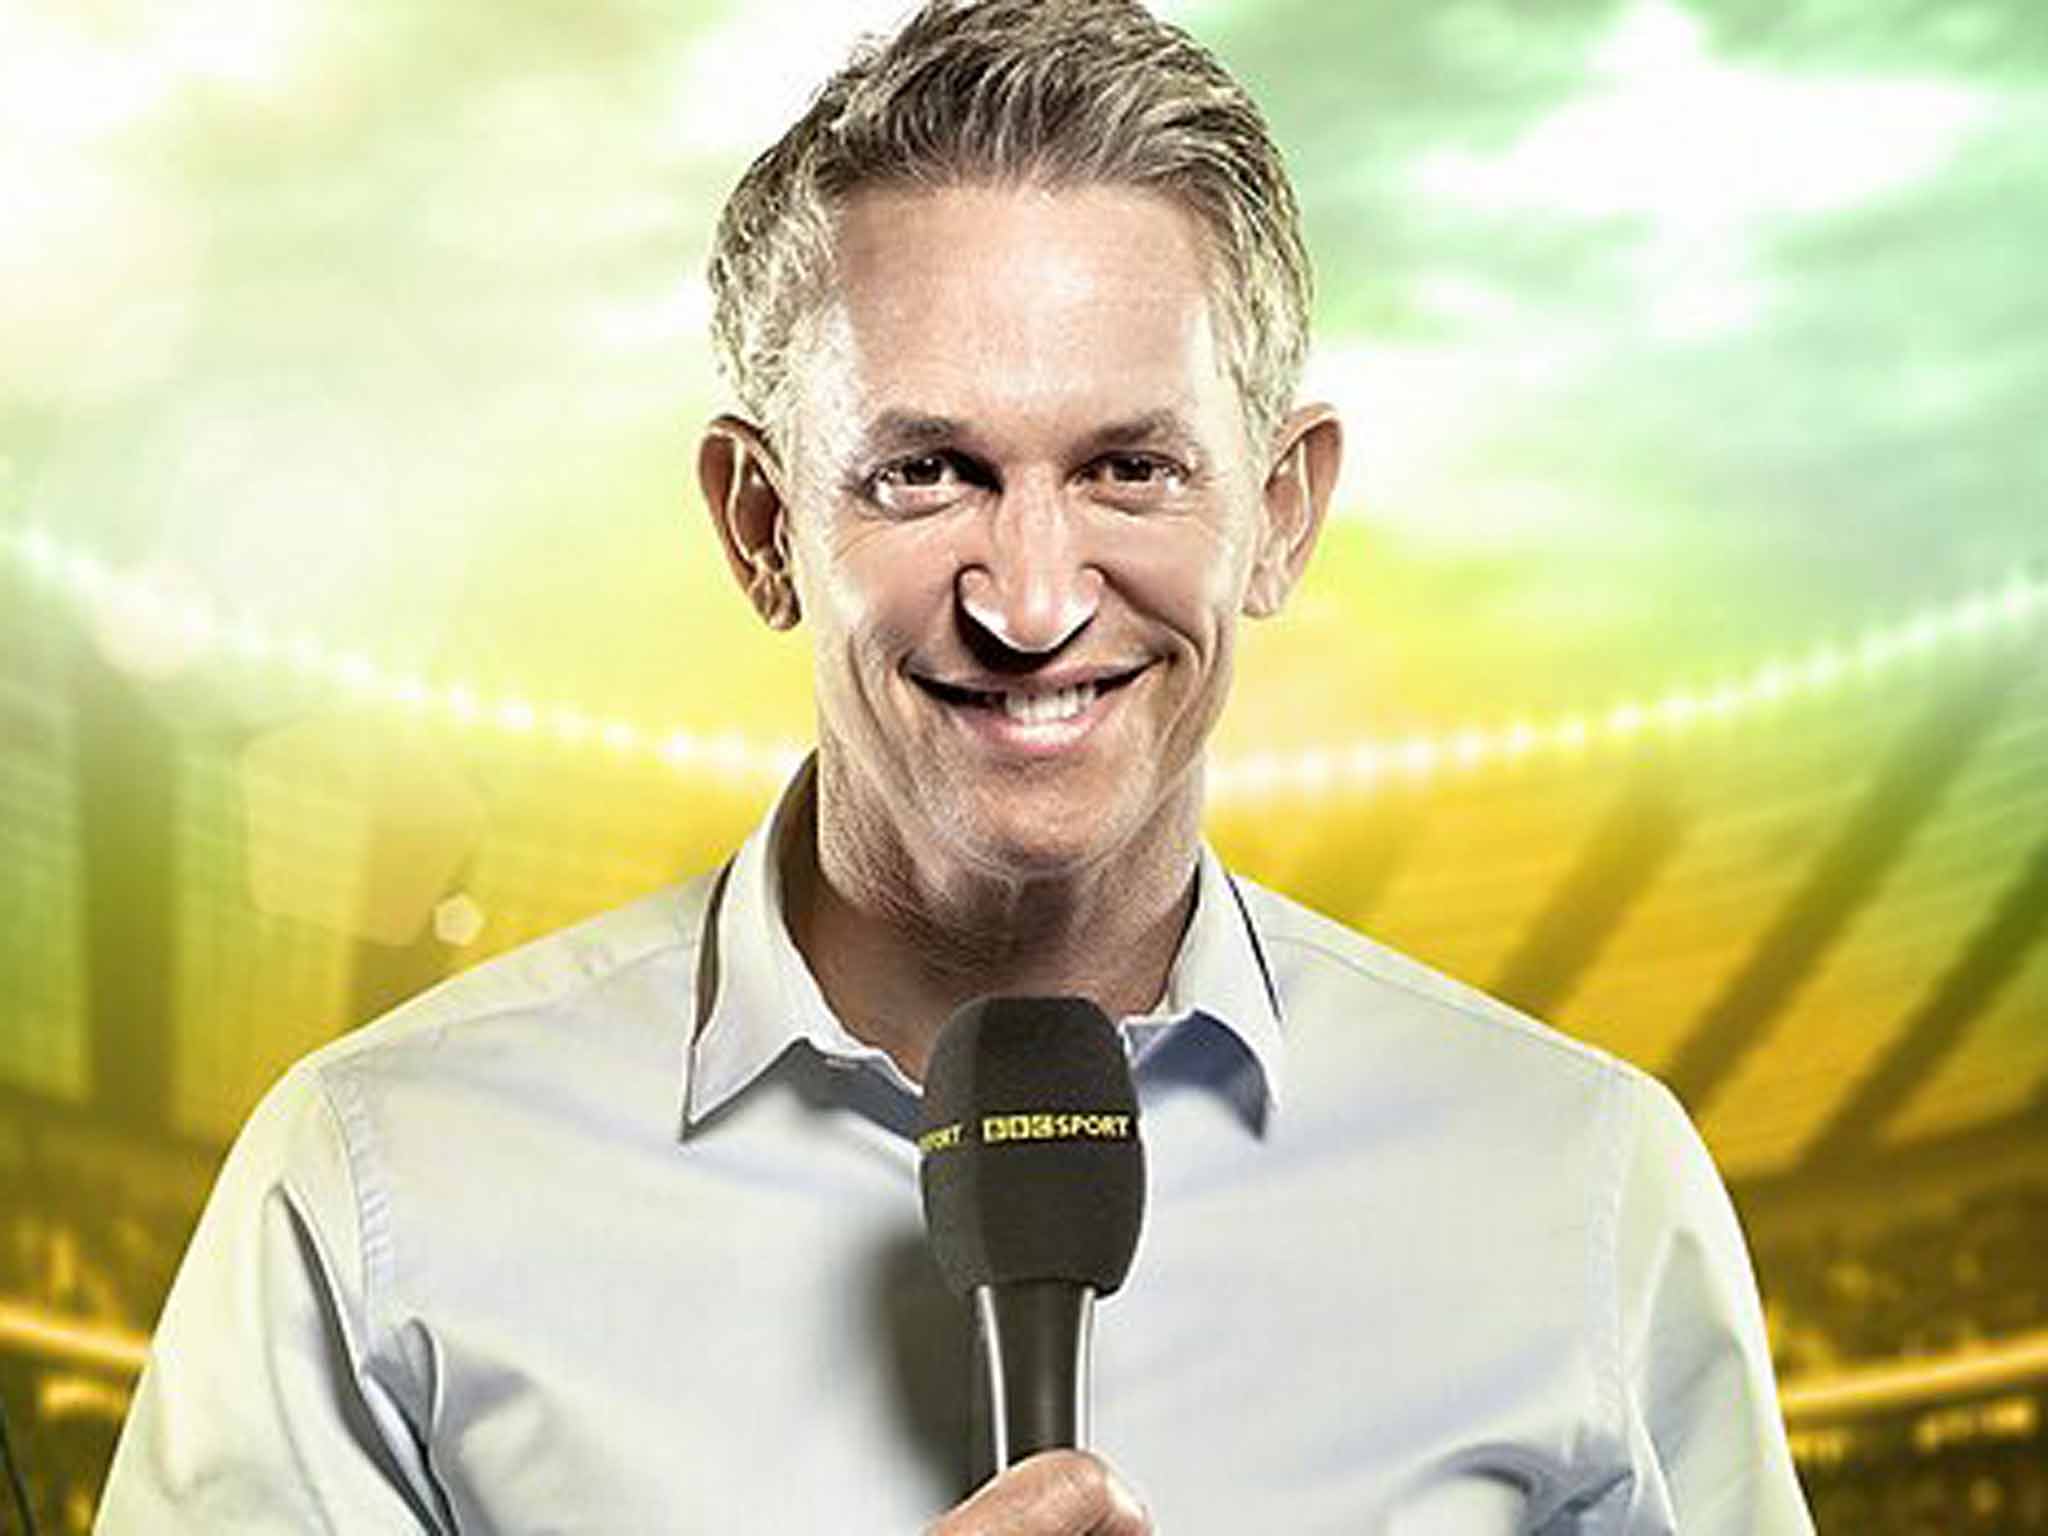 Gary Lineker is expected to be announced as BT Sport's new signing